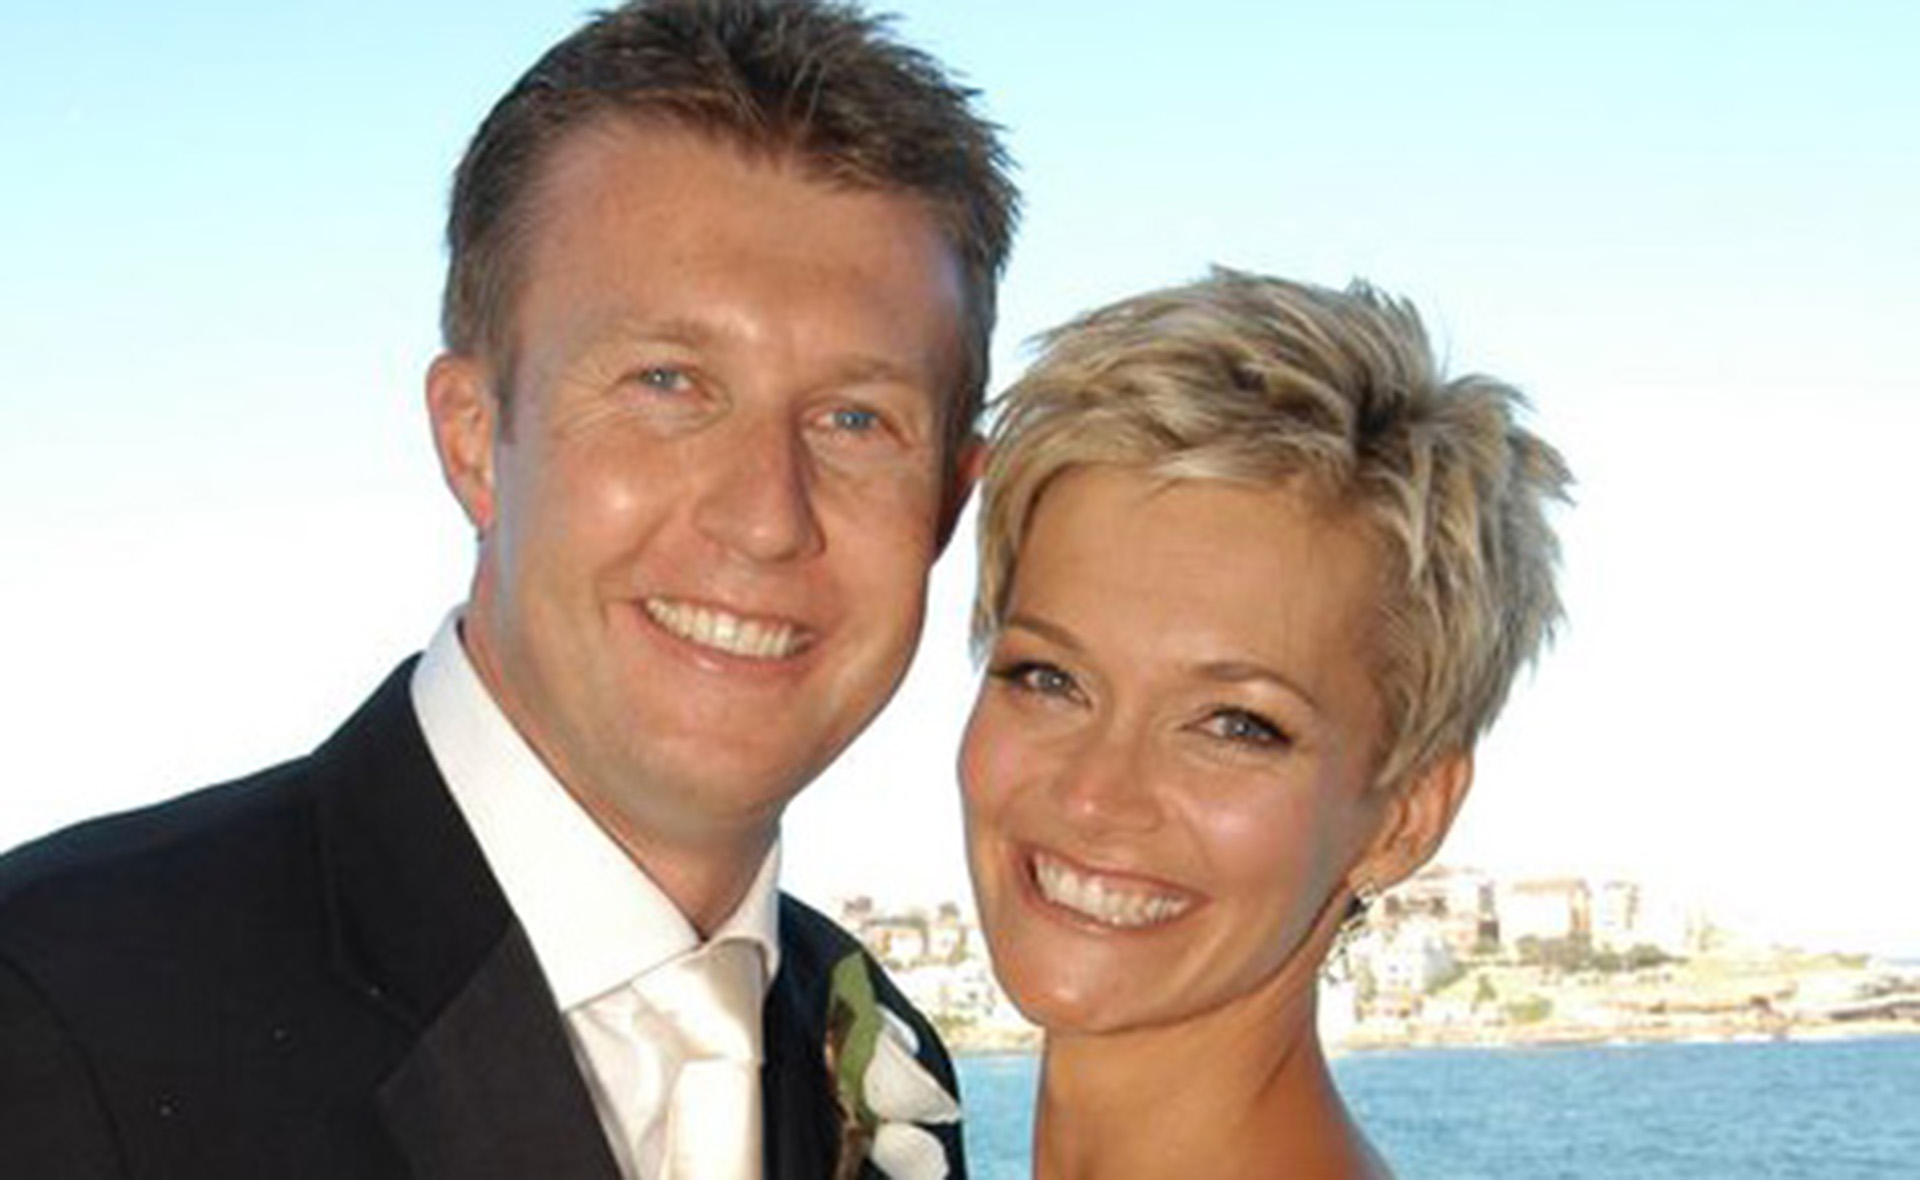 How Jessica Rowe and Peter Overton’s love story began with a date he didn’t want to go on